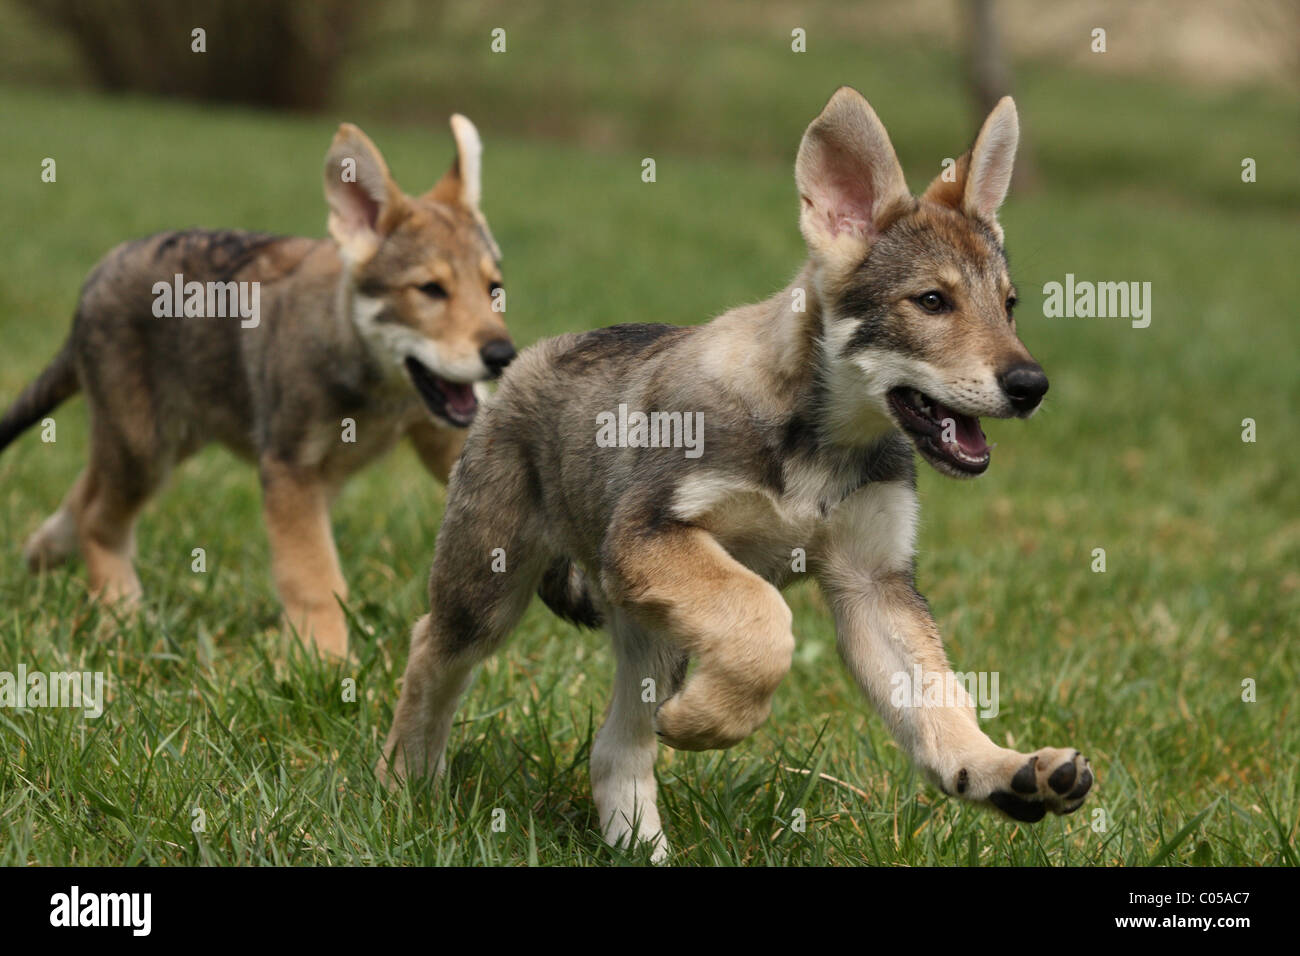 Saarloos Wolfhond High Resolution Stock Photography and Images - Alamy